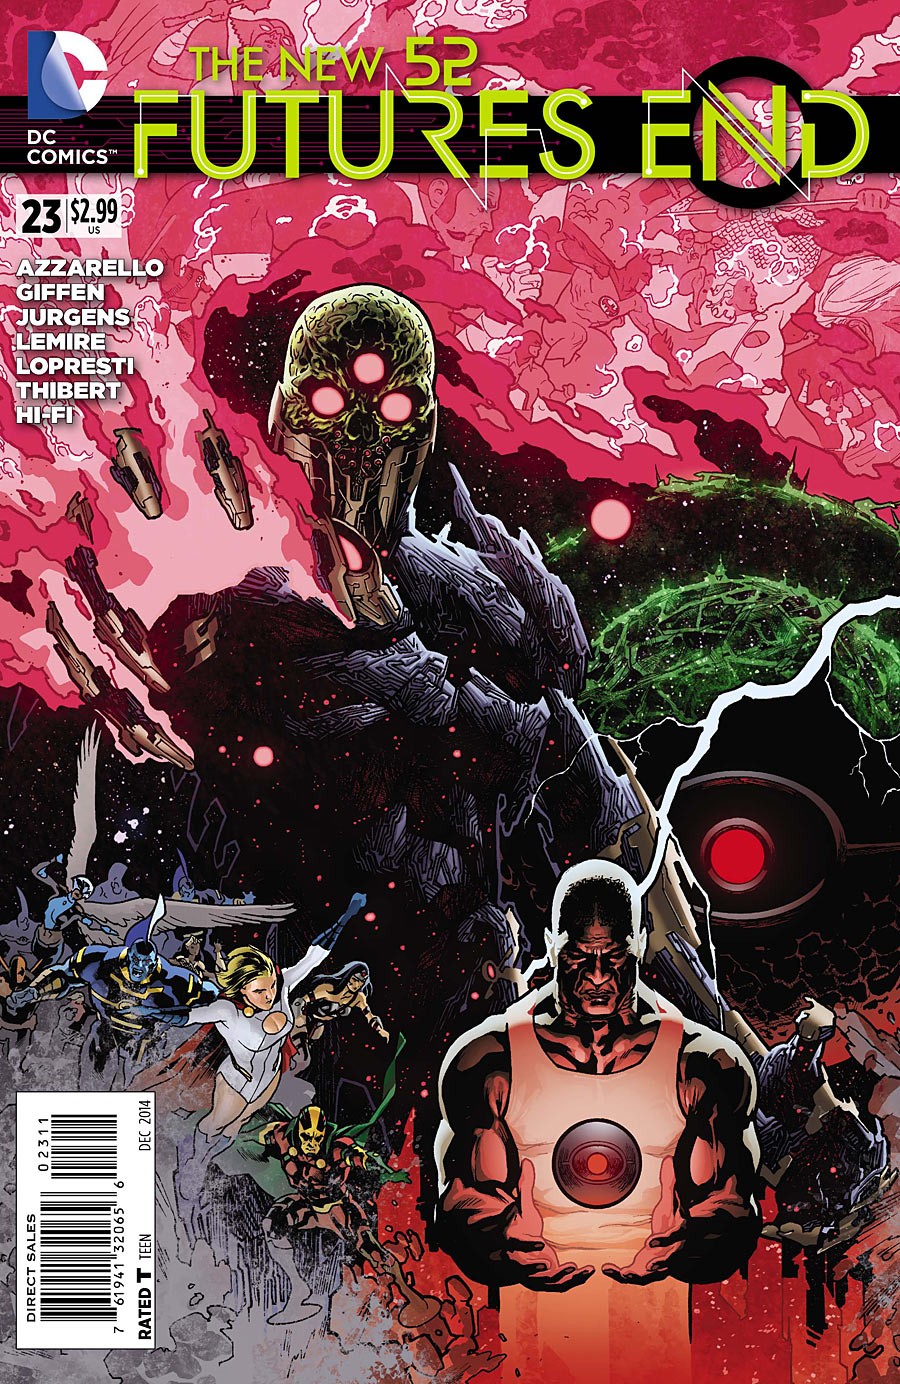 The New 52: Futures End Vol. 1 #23